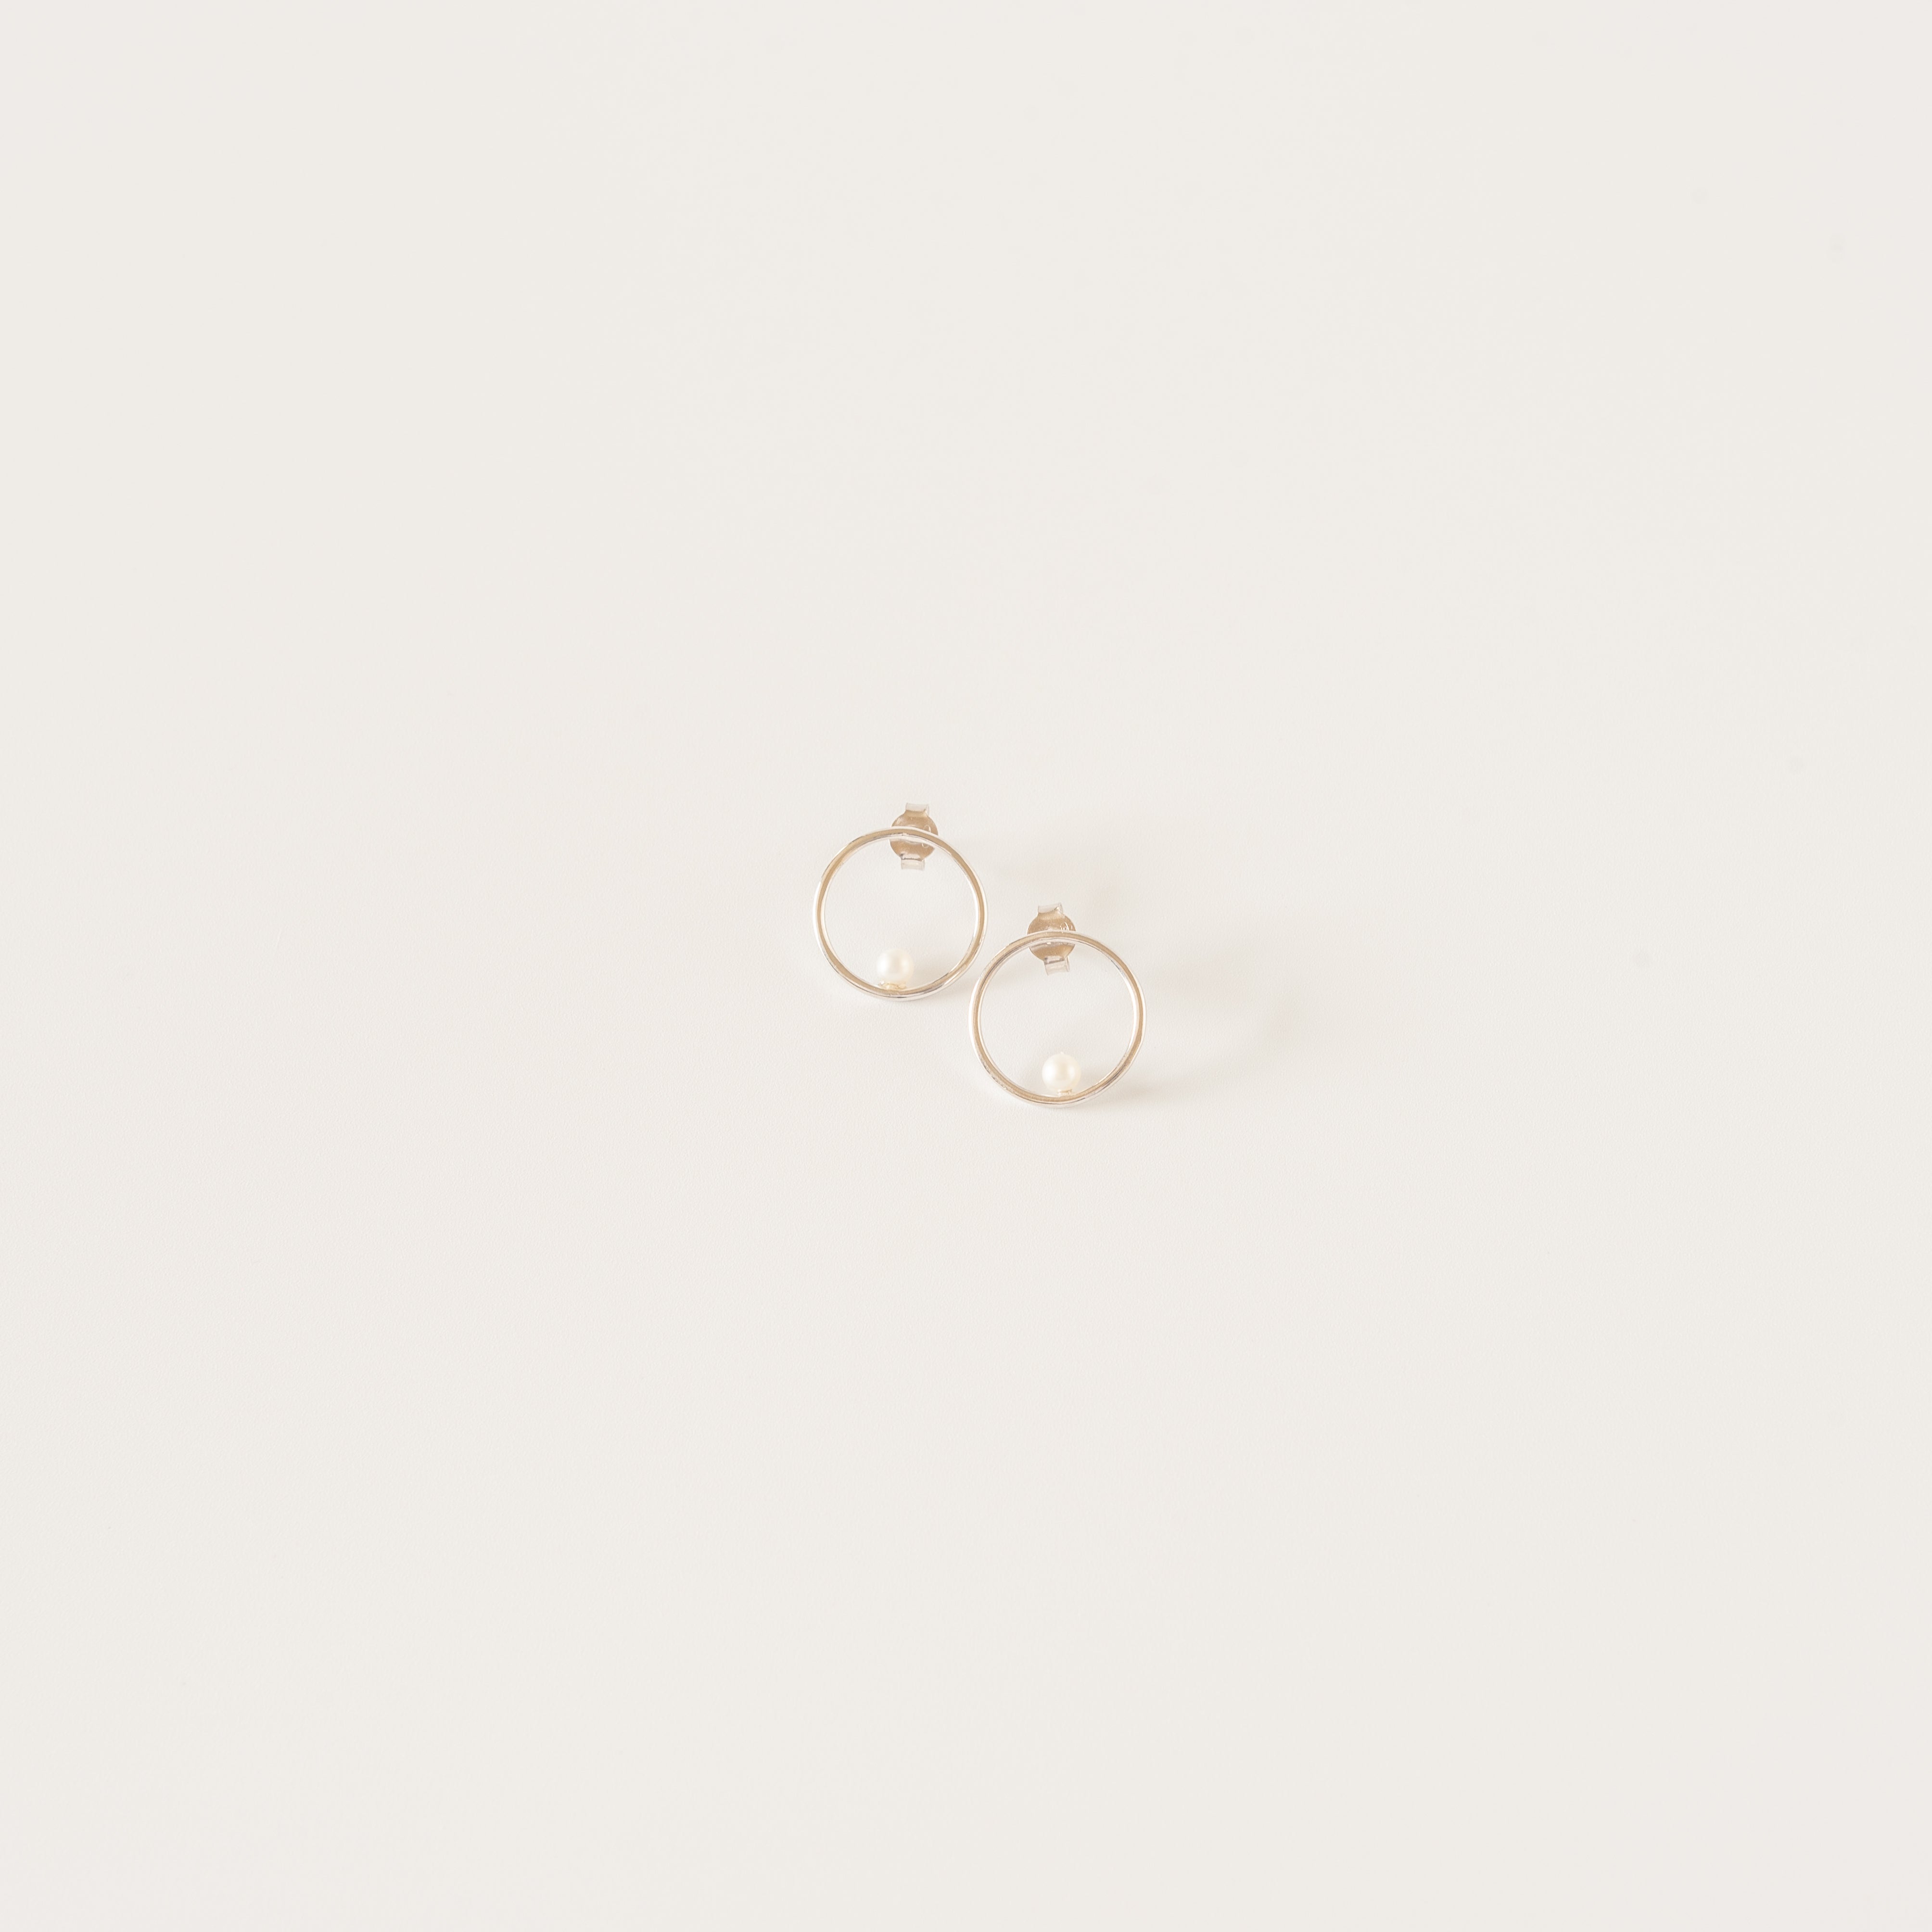 Billabong Circle Earrings with Pearl - Small